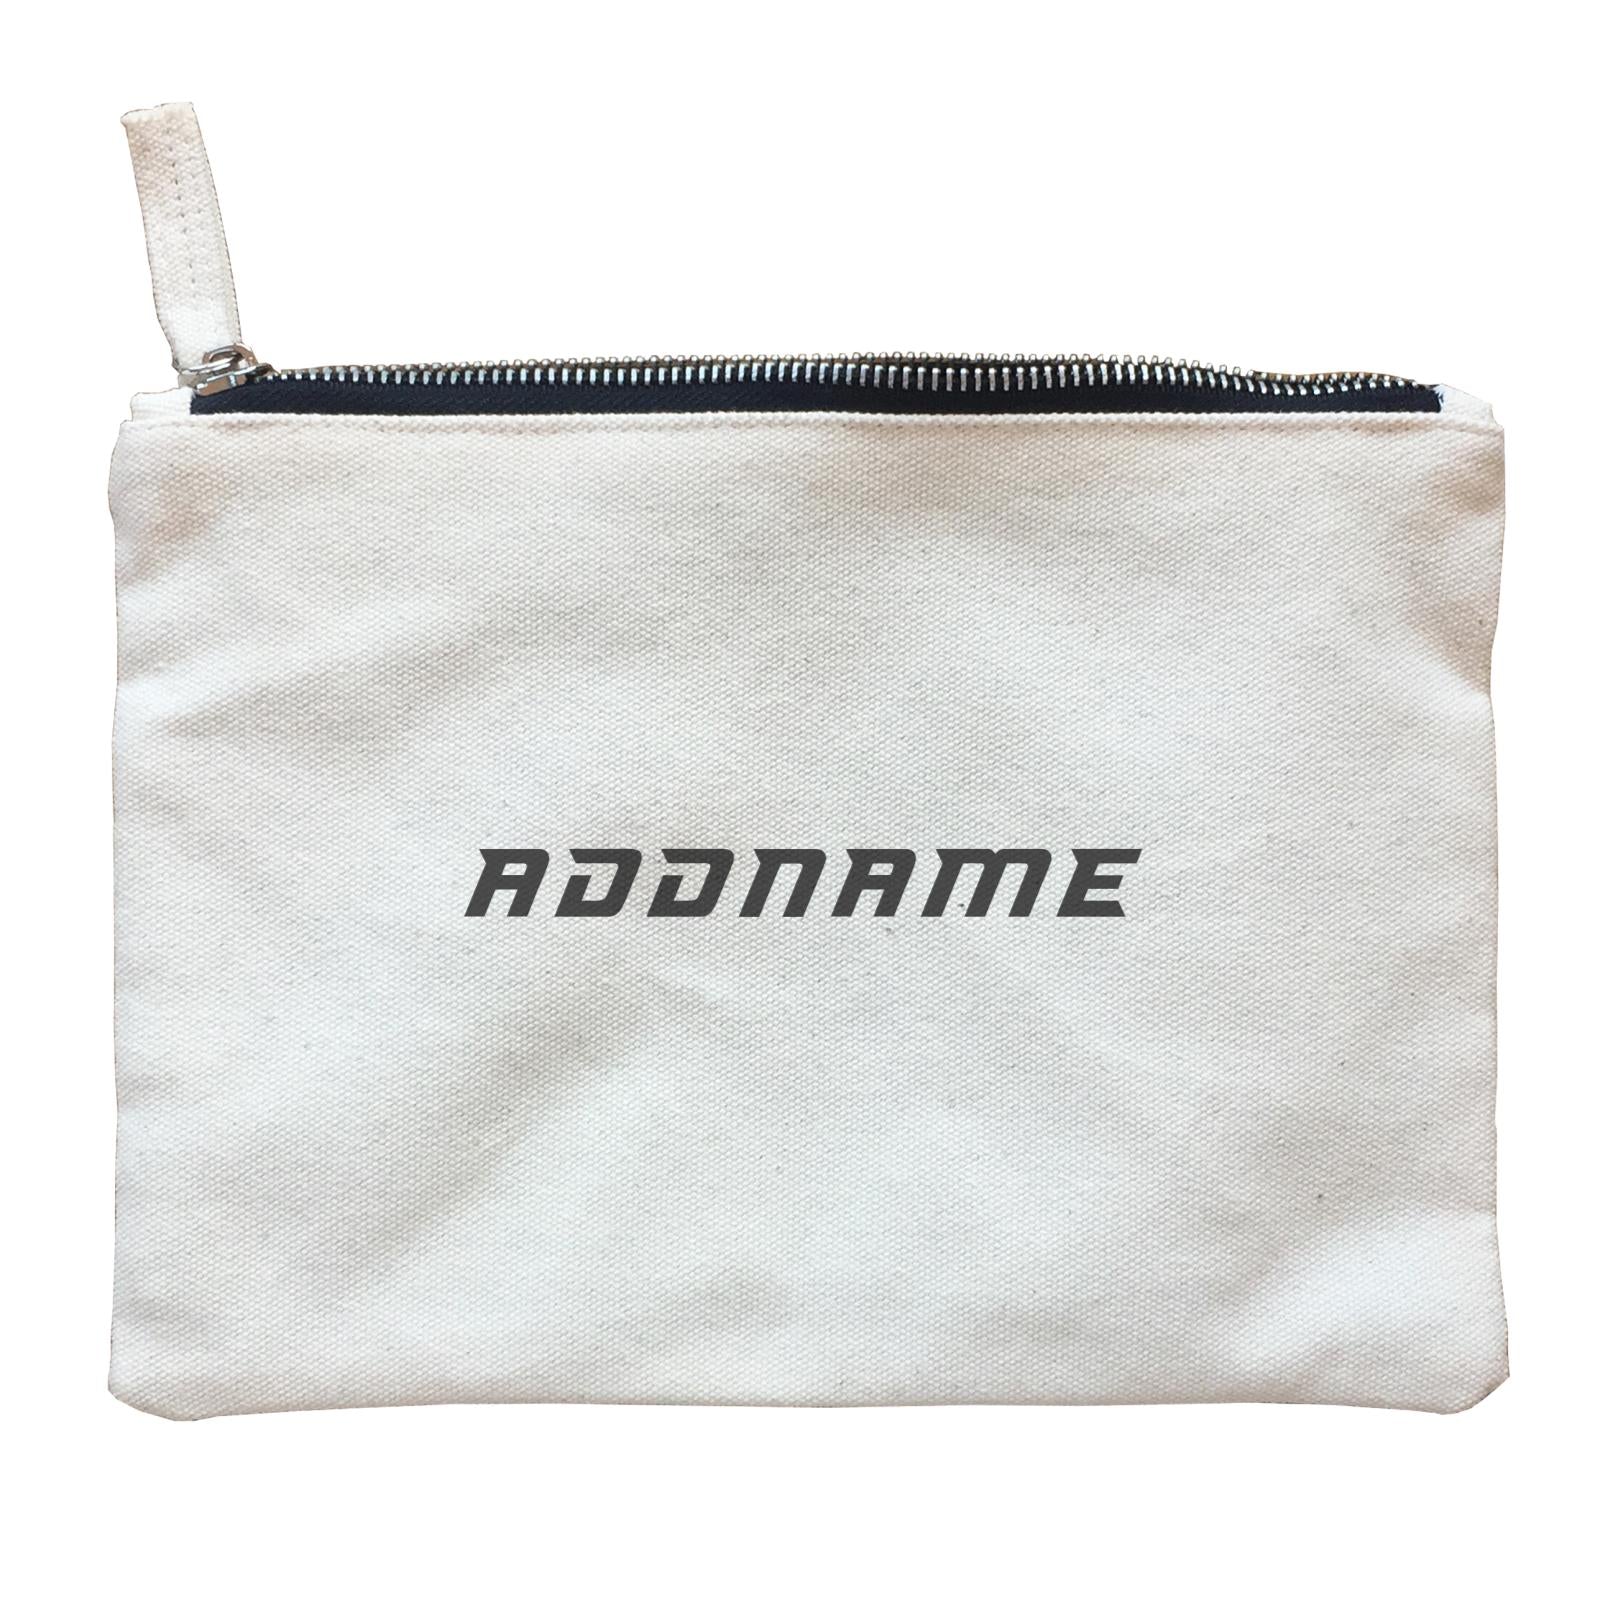 Modern Sporty Family Addname Accessories Zipper Pouch